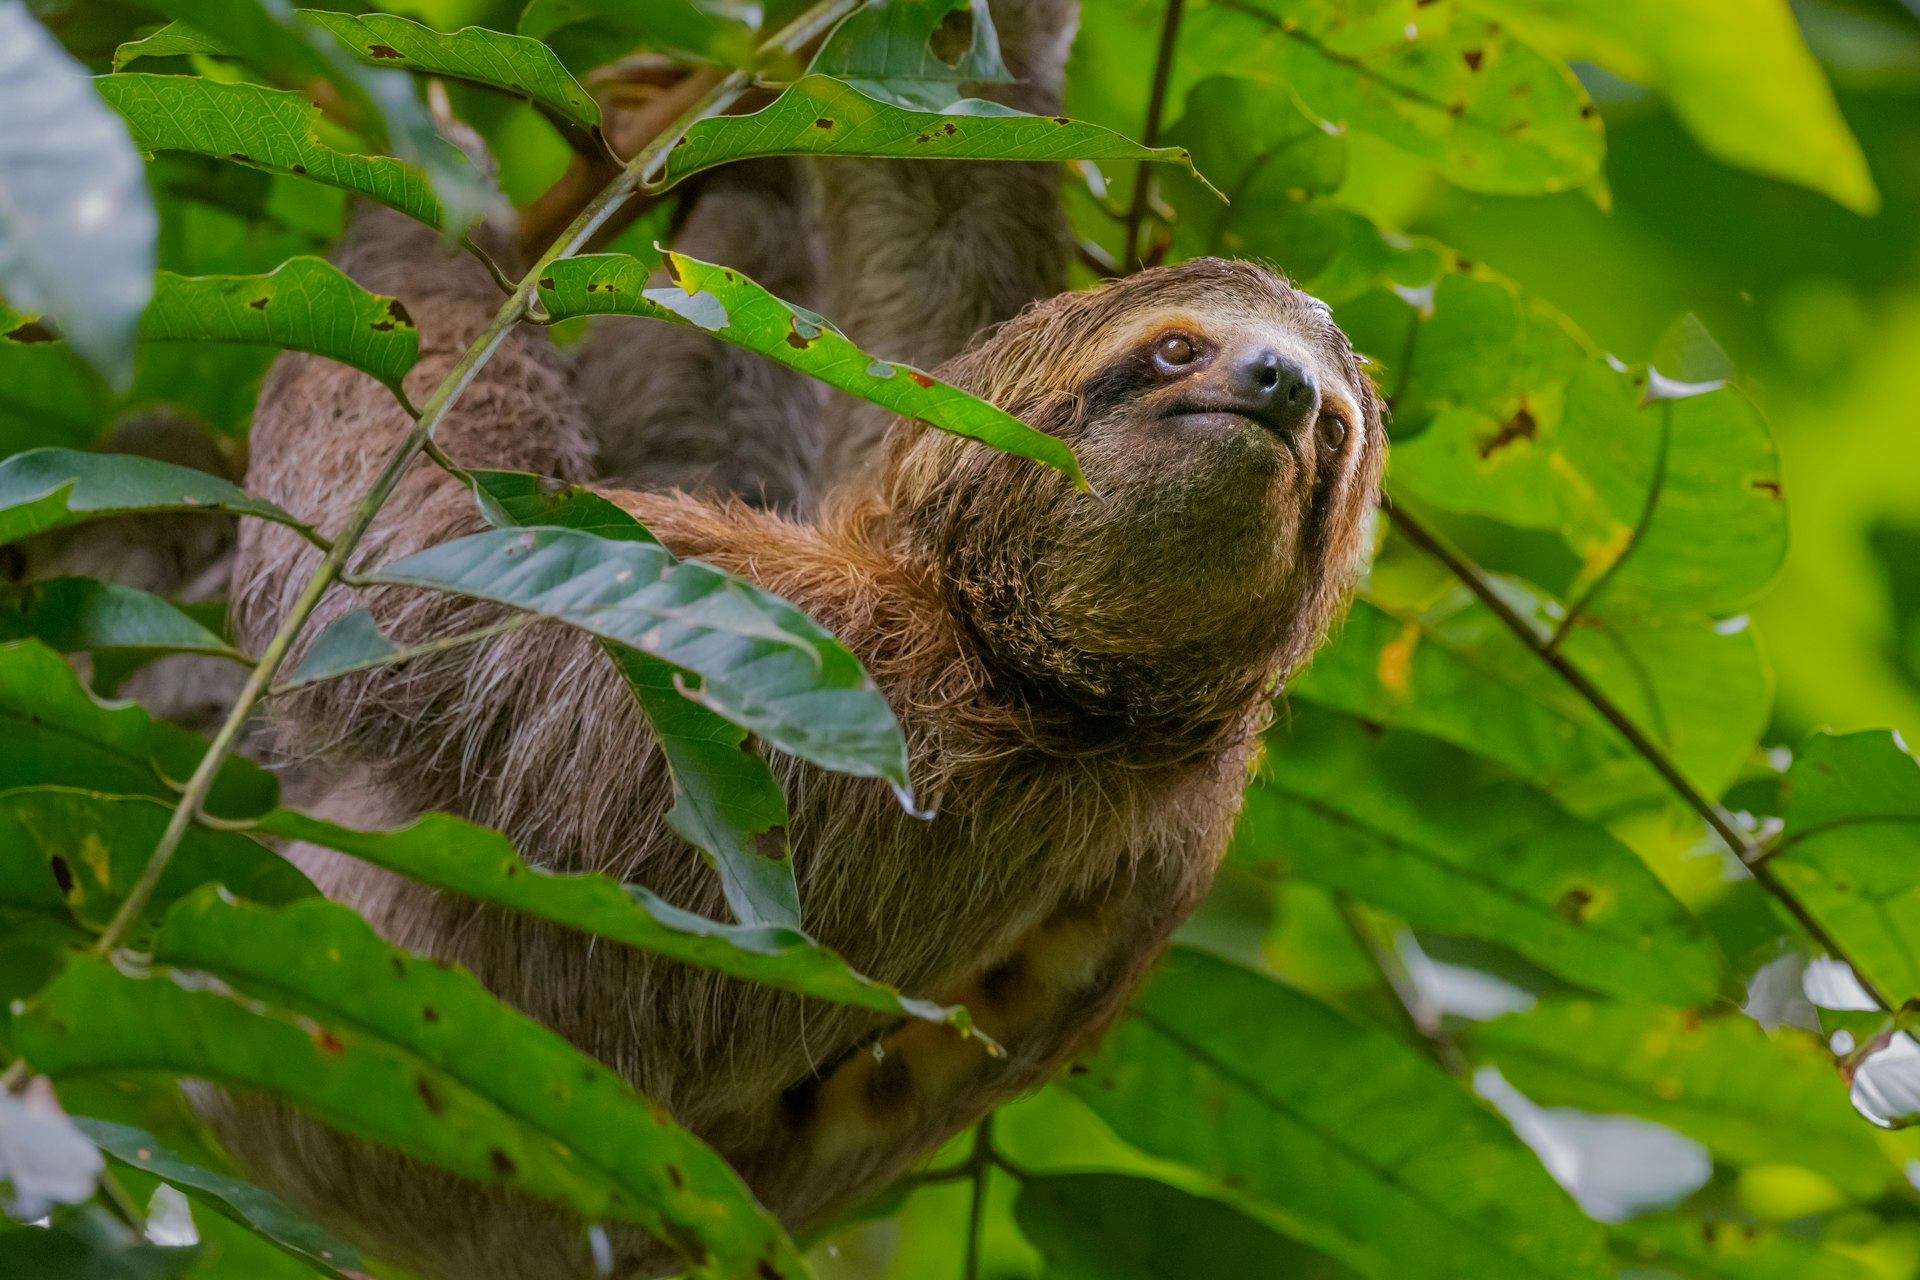 A closeup shot of a Sloths on a tree with the green leaves around in Manuel Antonio National Park, Costa Rica